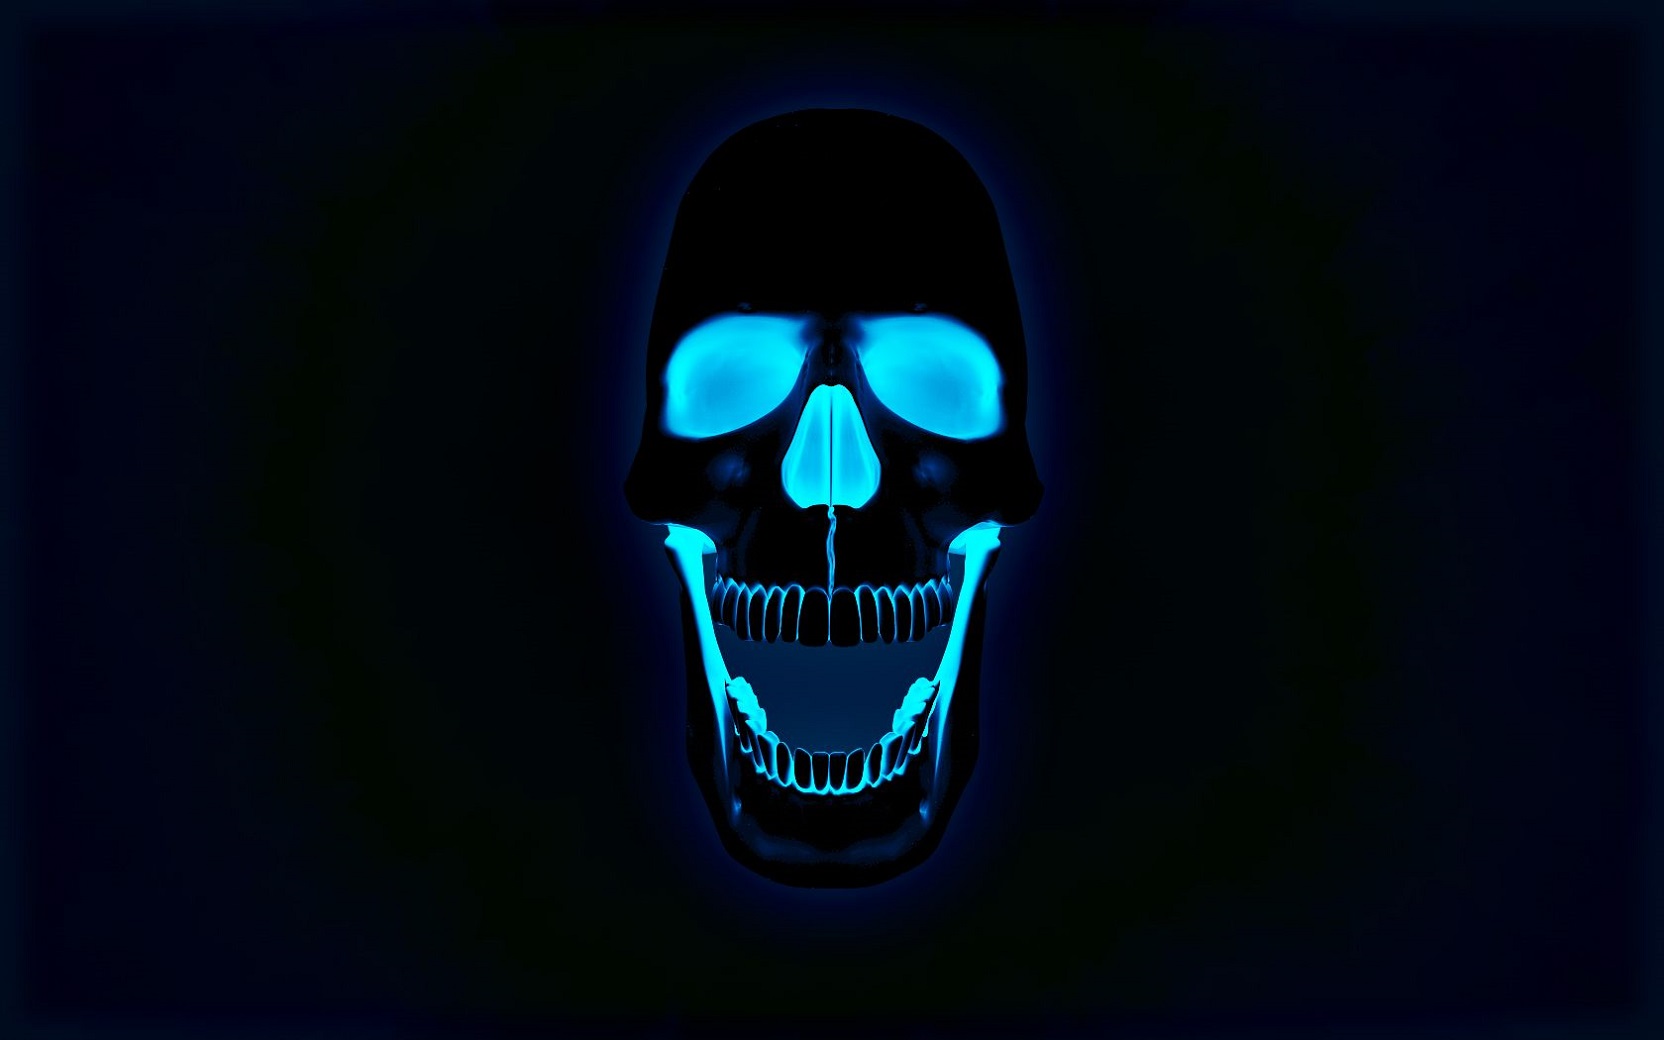 Awesome Skull Wallpaper IBackground